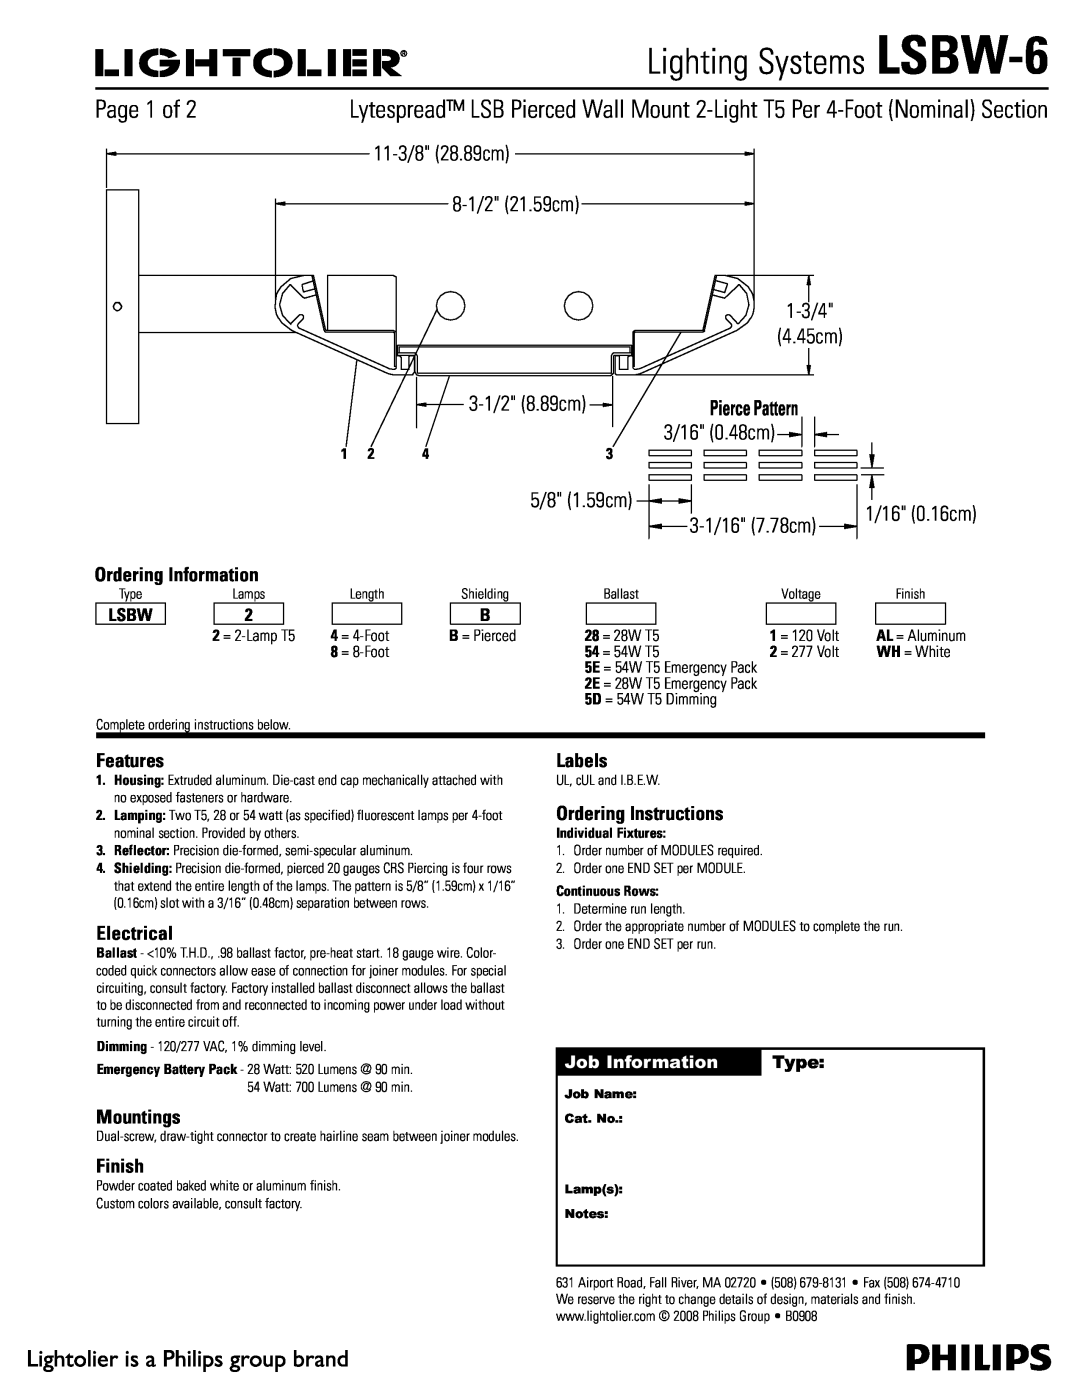 Lightolier manual Lighting Systems LSBW-6, 1BHFPG, Features, Electrical, Mountings, Finish, Labels, Type, 1-3/4 